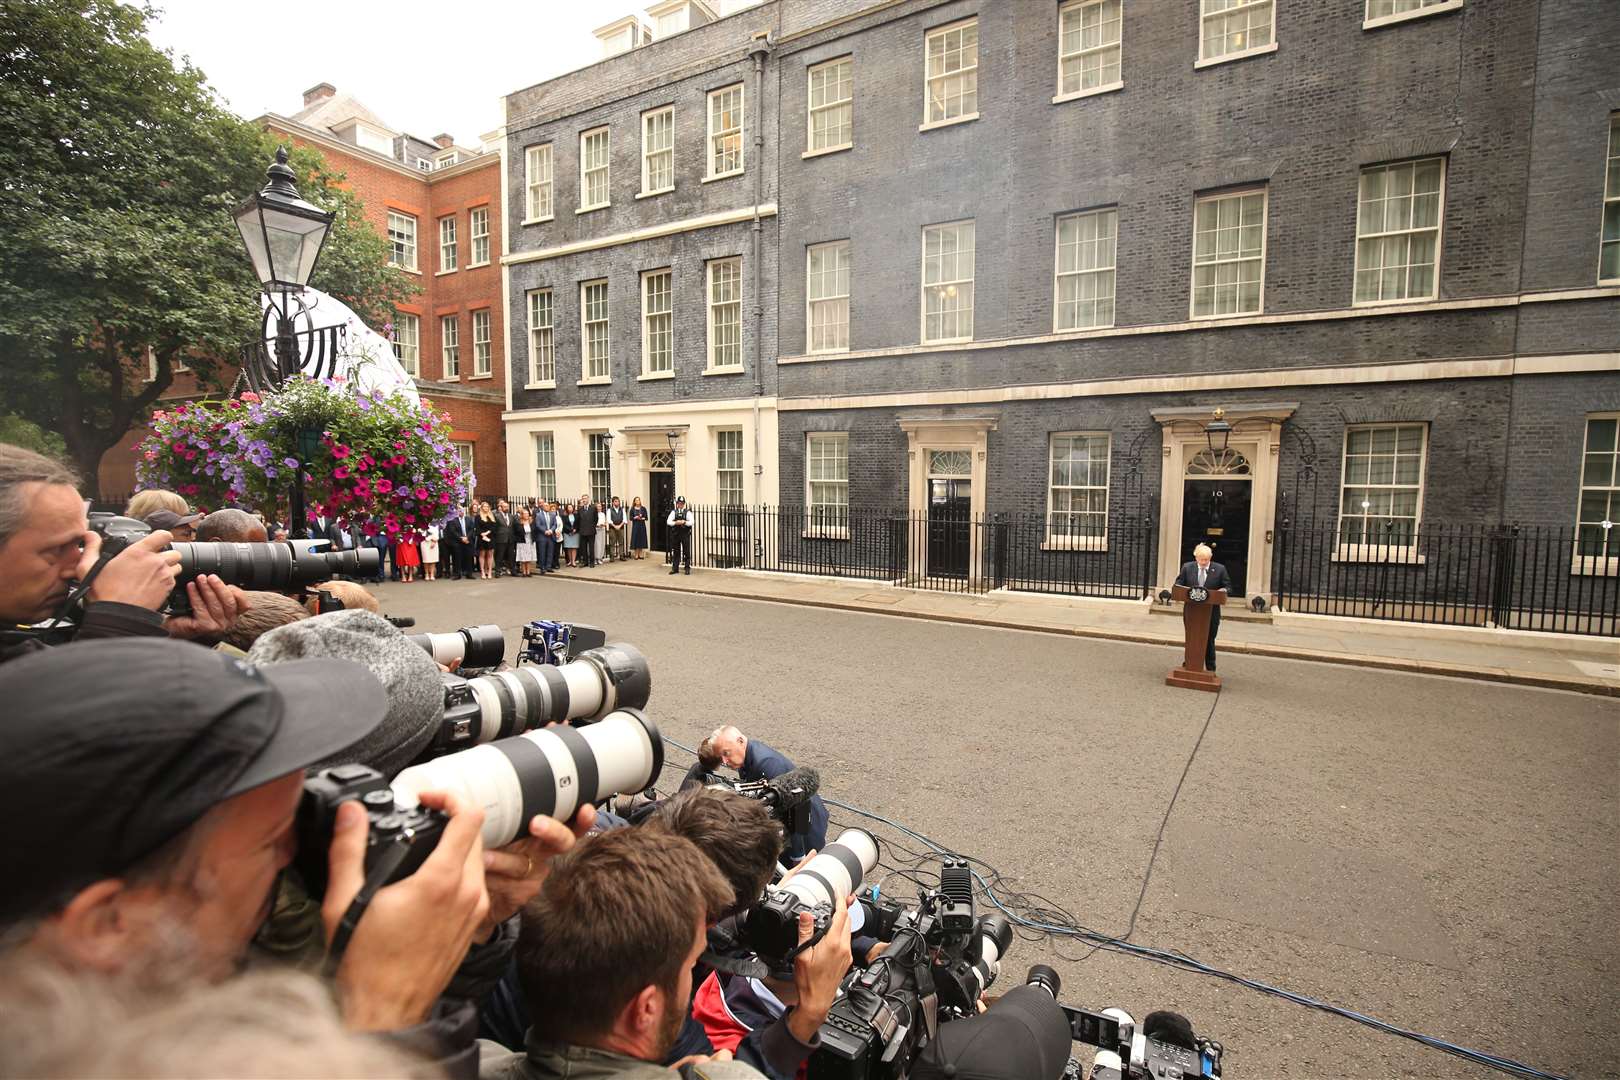 Prime minister Boris Johnson reads a statement on July 7 outside 10 Downing Street formally resigning as Conservative Party leader after ministers and MPs made clear his position was untenable (James Manning/PA)